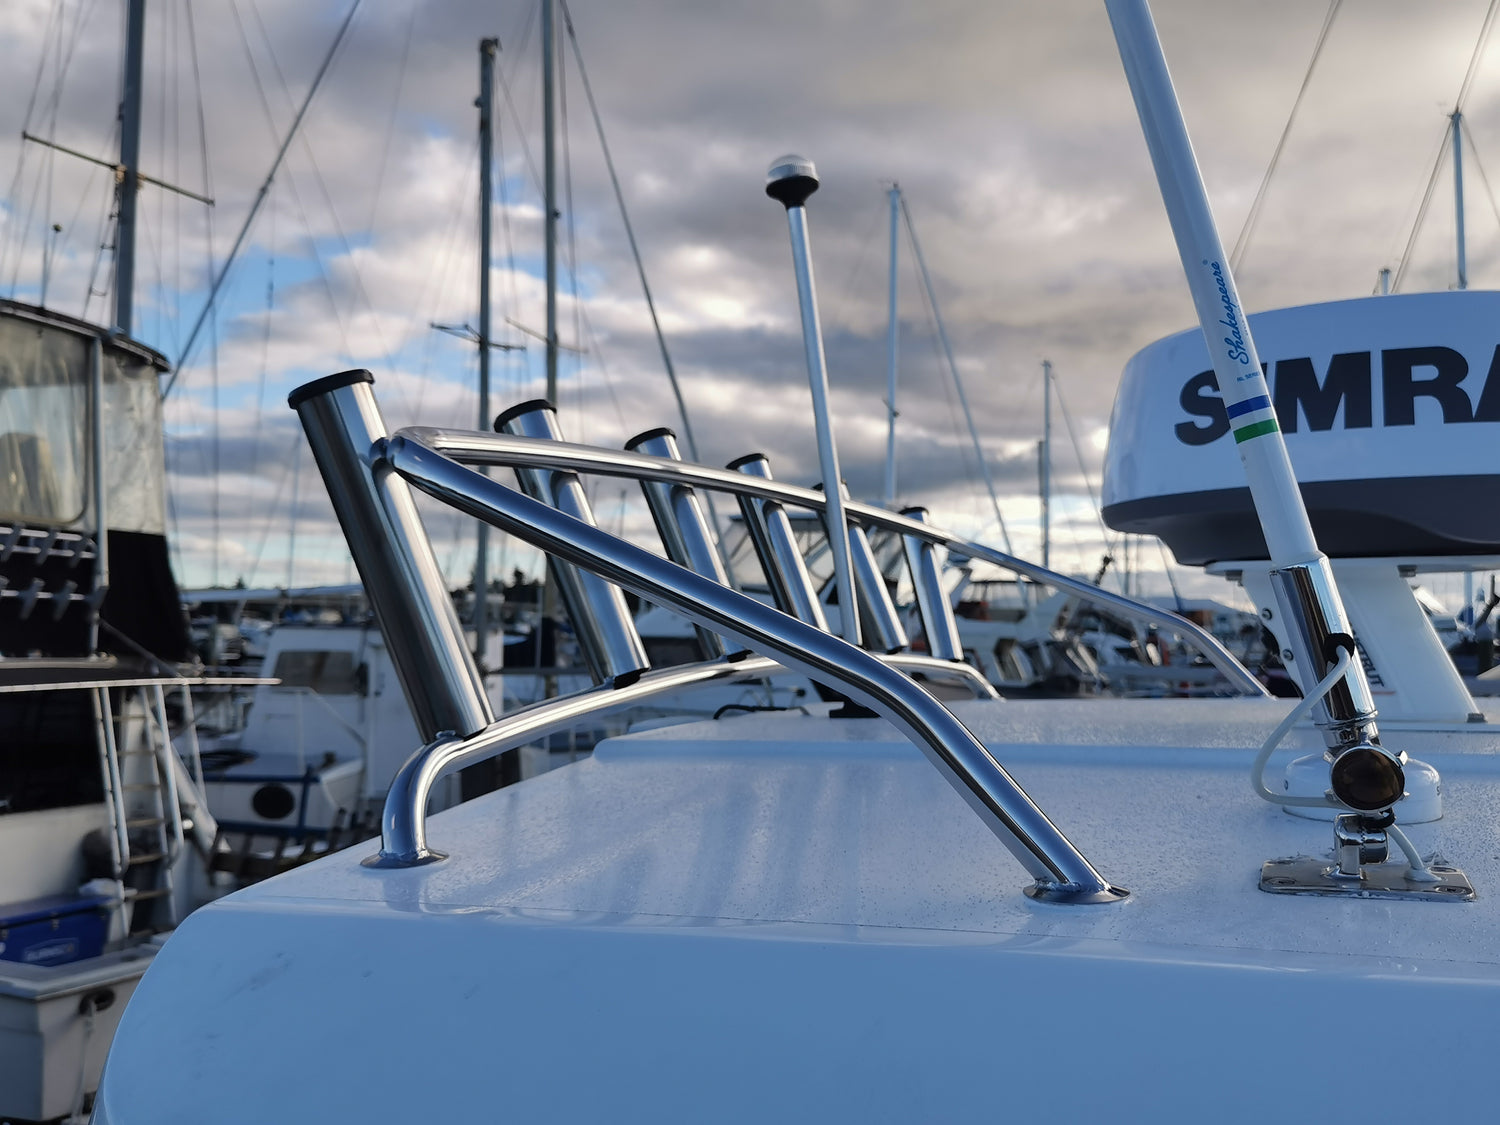 Get expert boat care, wherever you are in Tauranga: